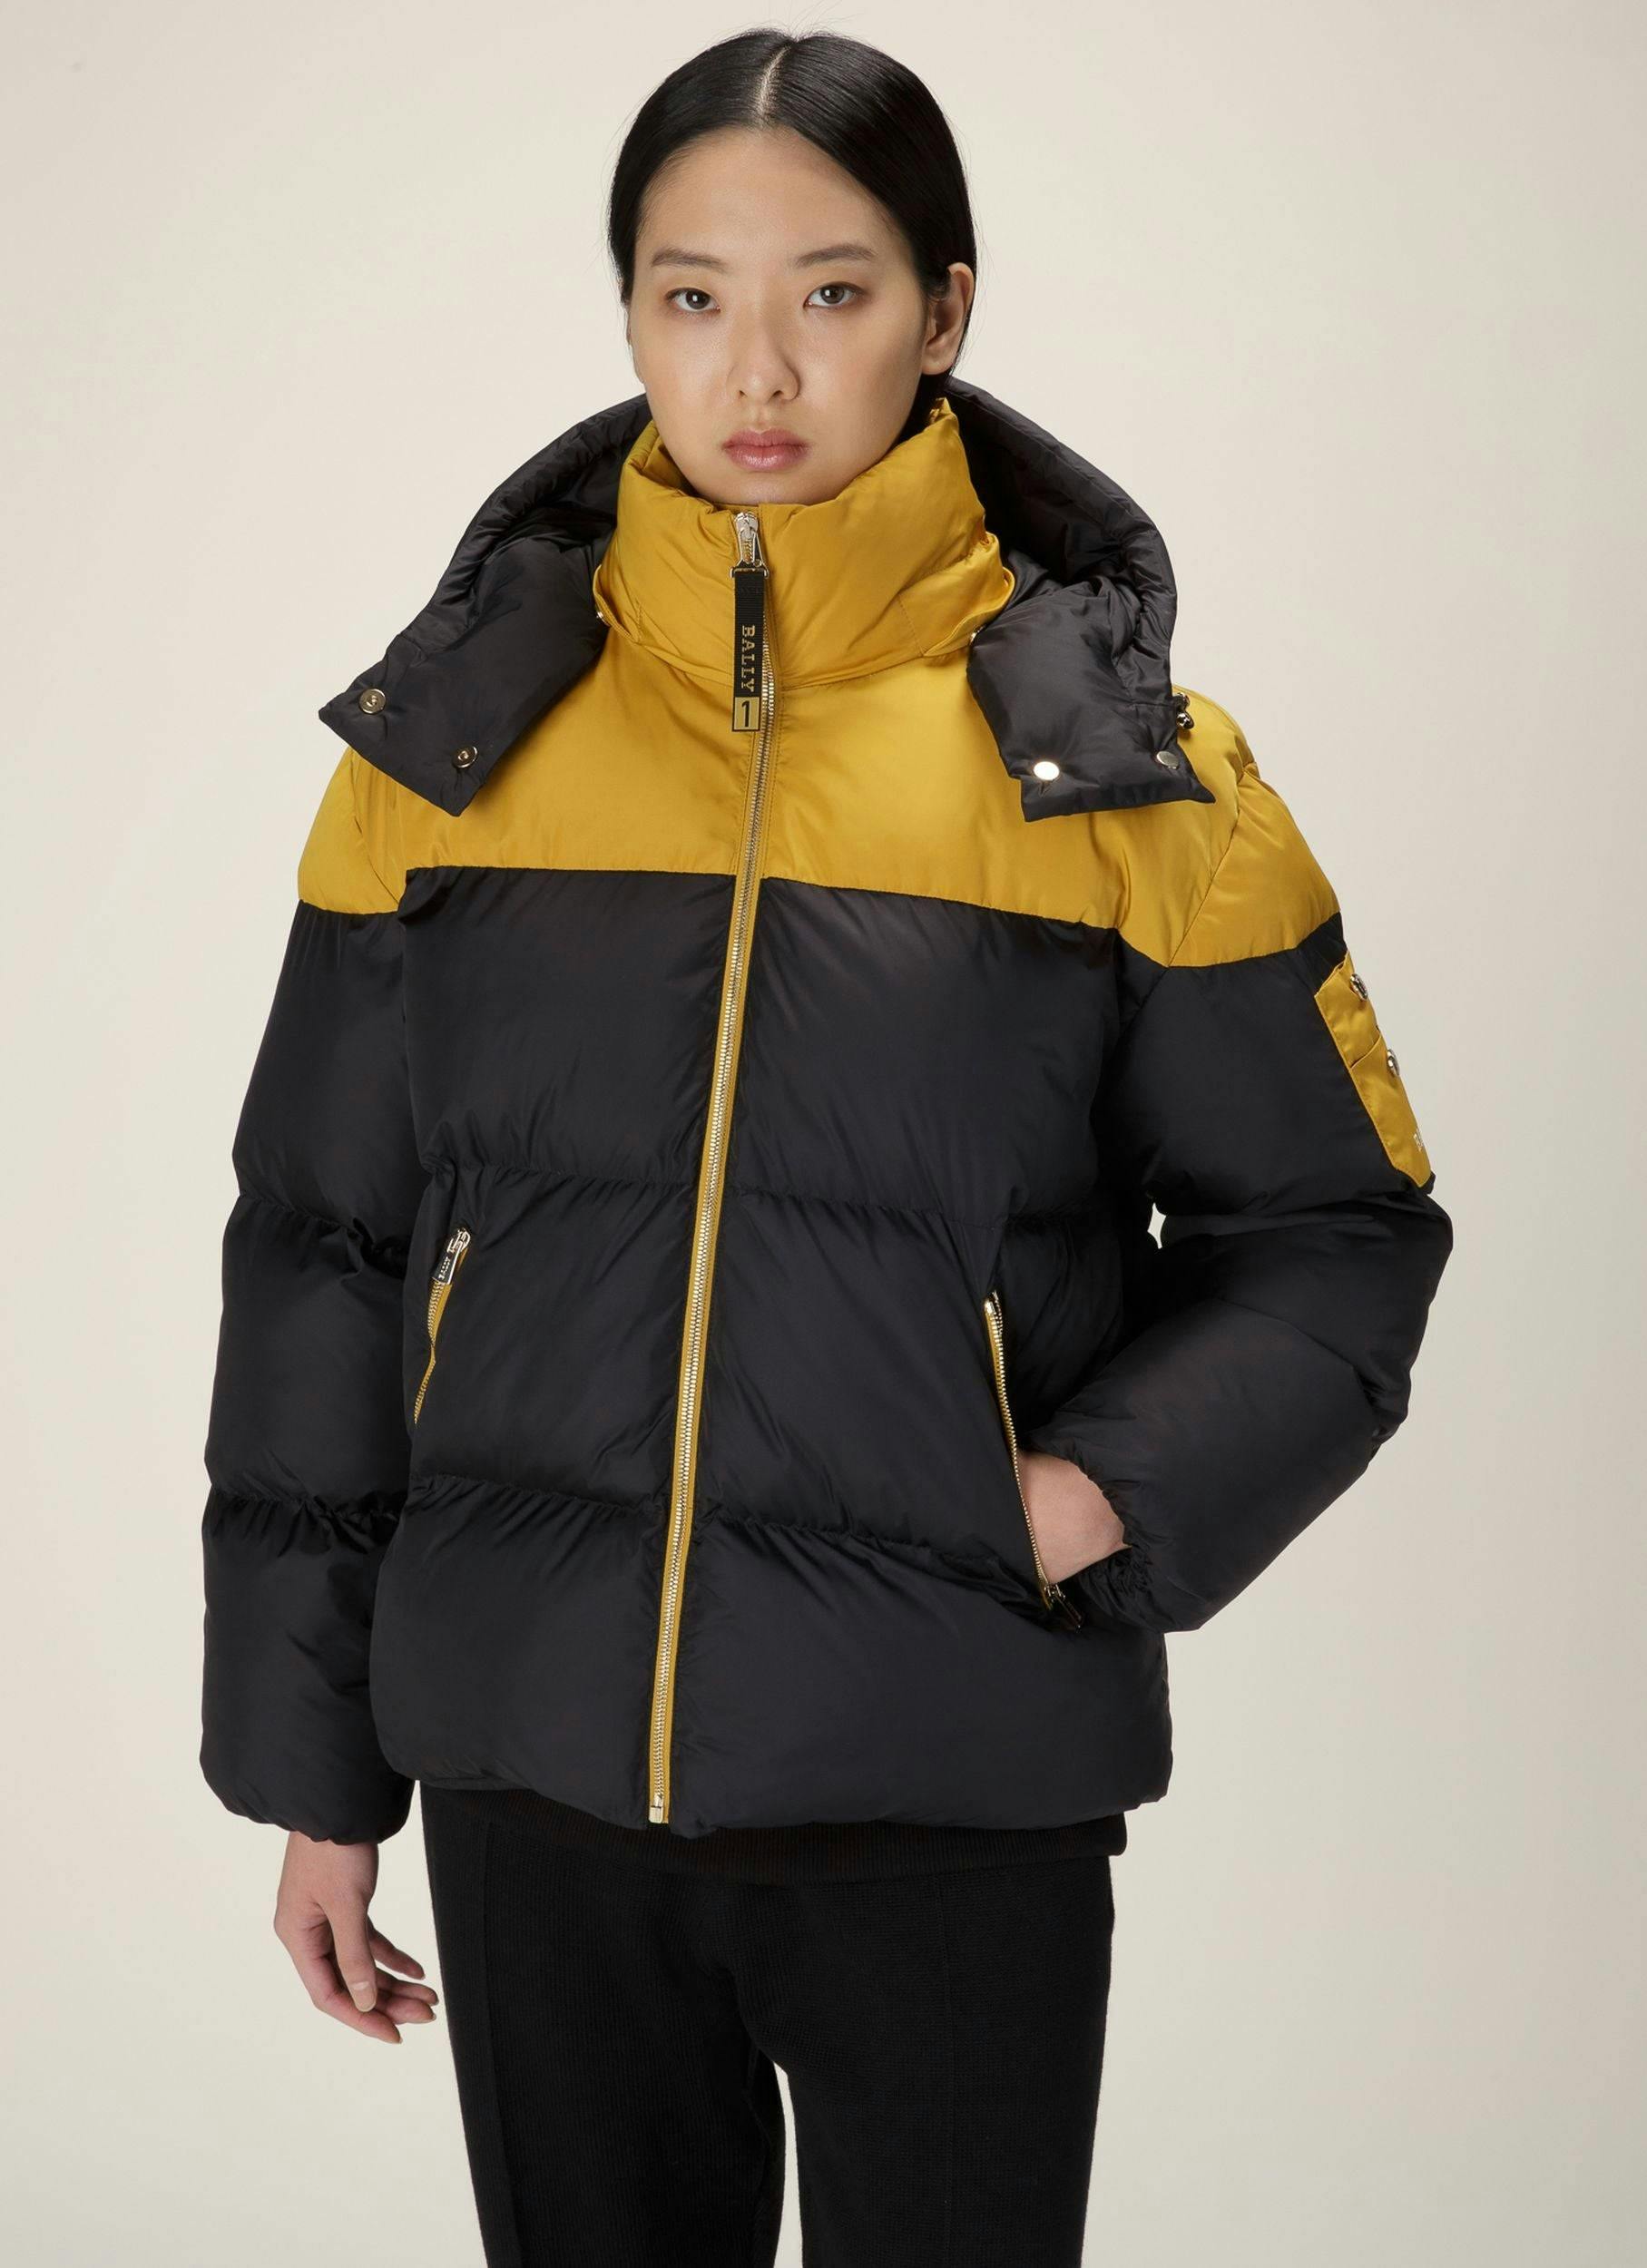 WINTER GOLD Outerwear In Black & Yellow         - Femme - Bally - 03